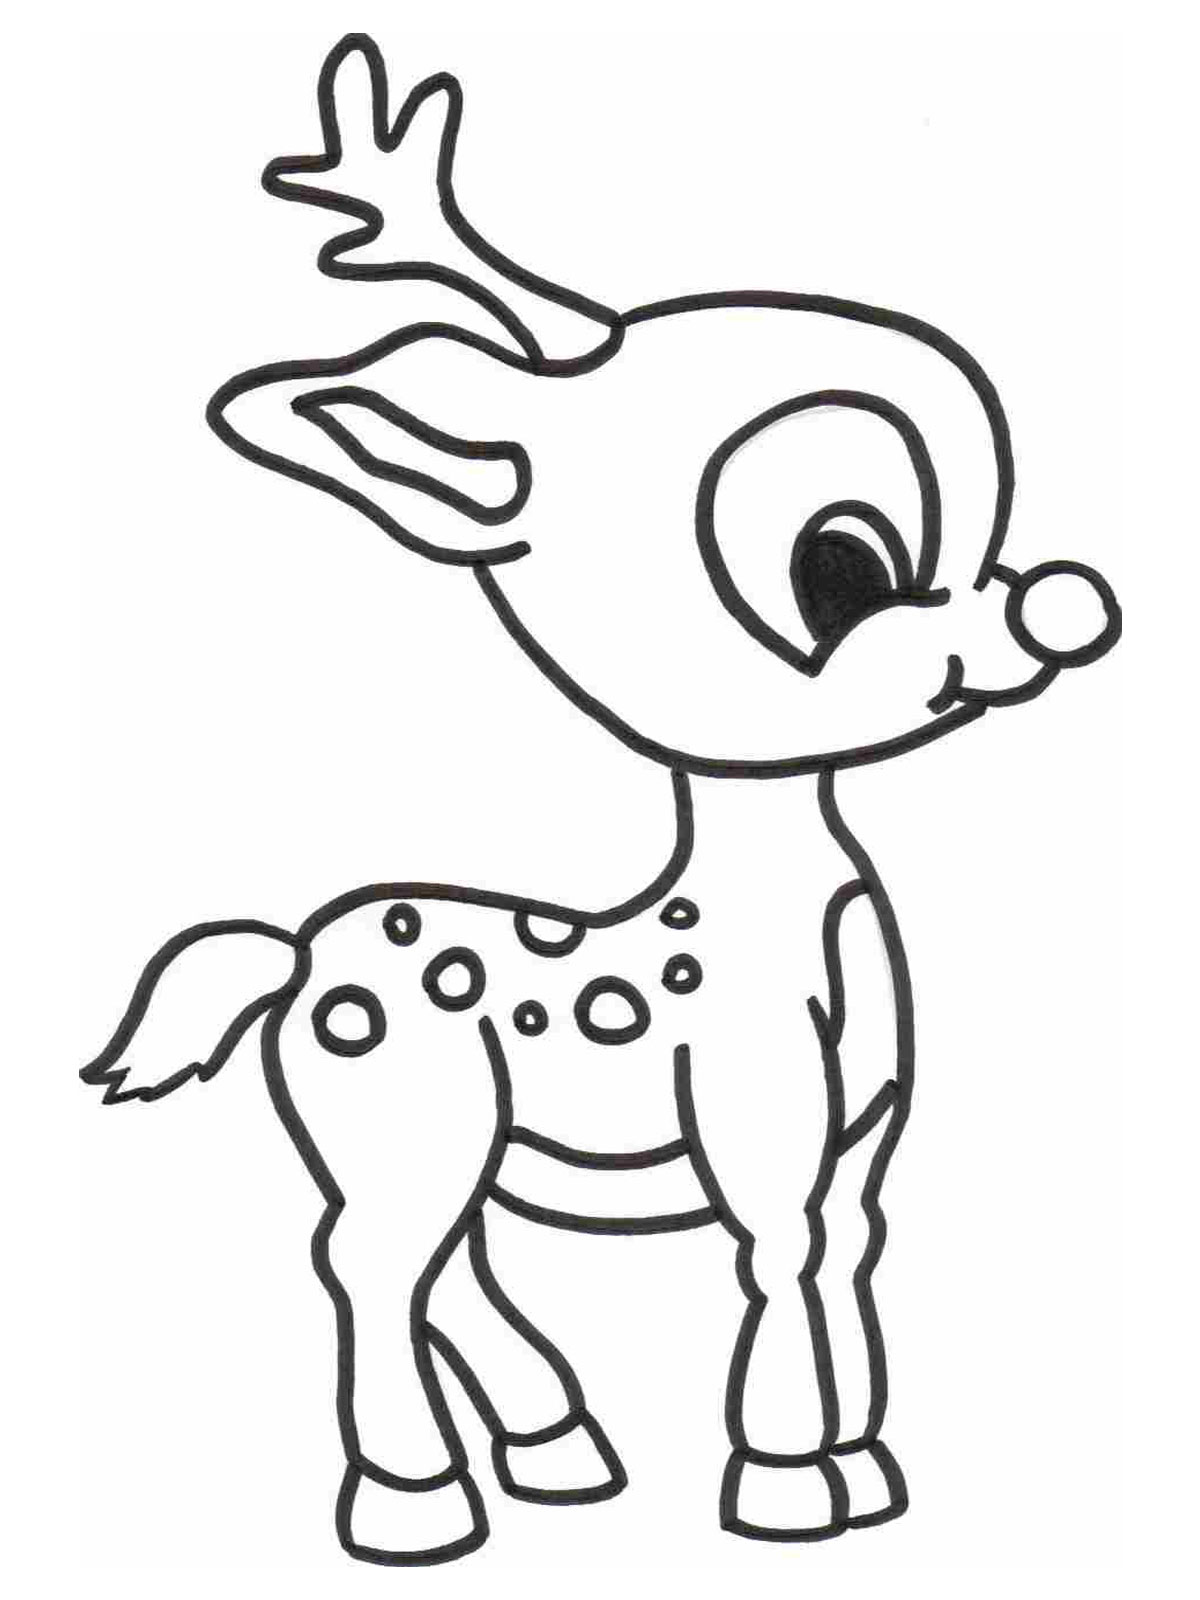  Free Animal Coloring Pages   8